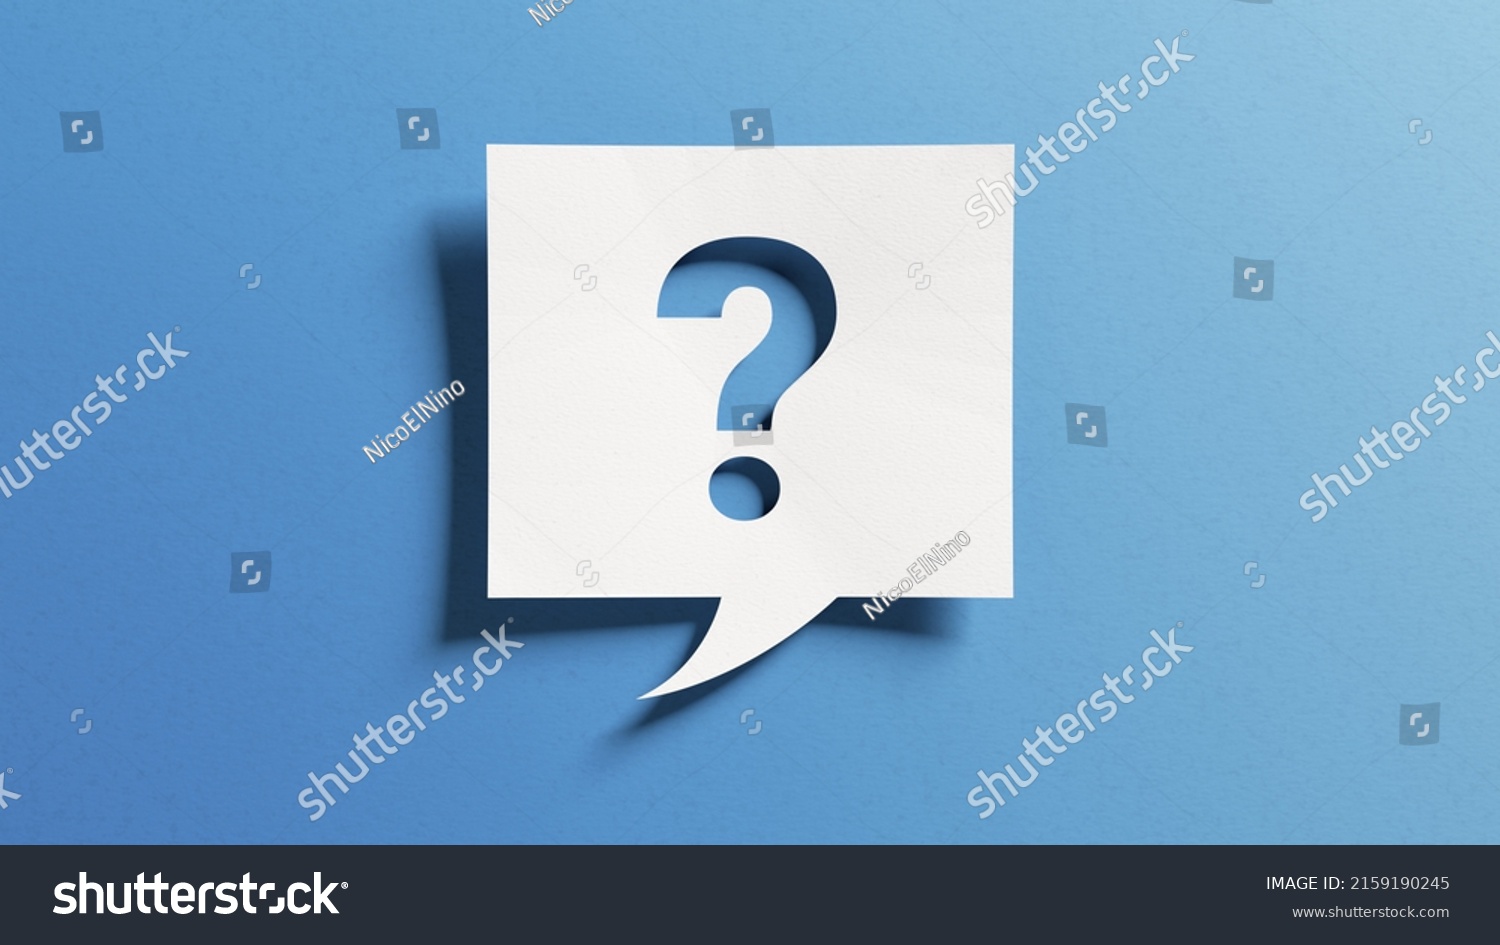 Question mark symbol for FAQ, information, problem and solution concepts. Quiz, test, survey, interrogation, support, knowledge, decision. Minimalist design with icon cutout paper and blue background. #2159190245